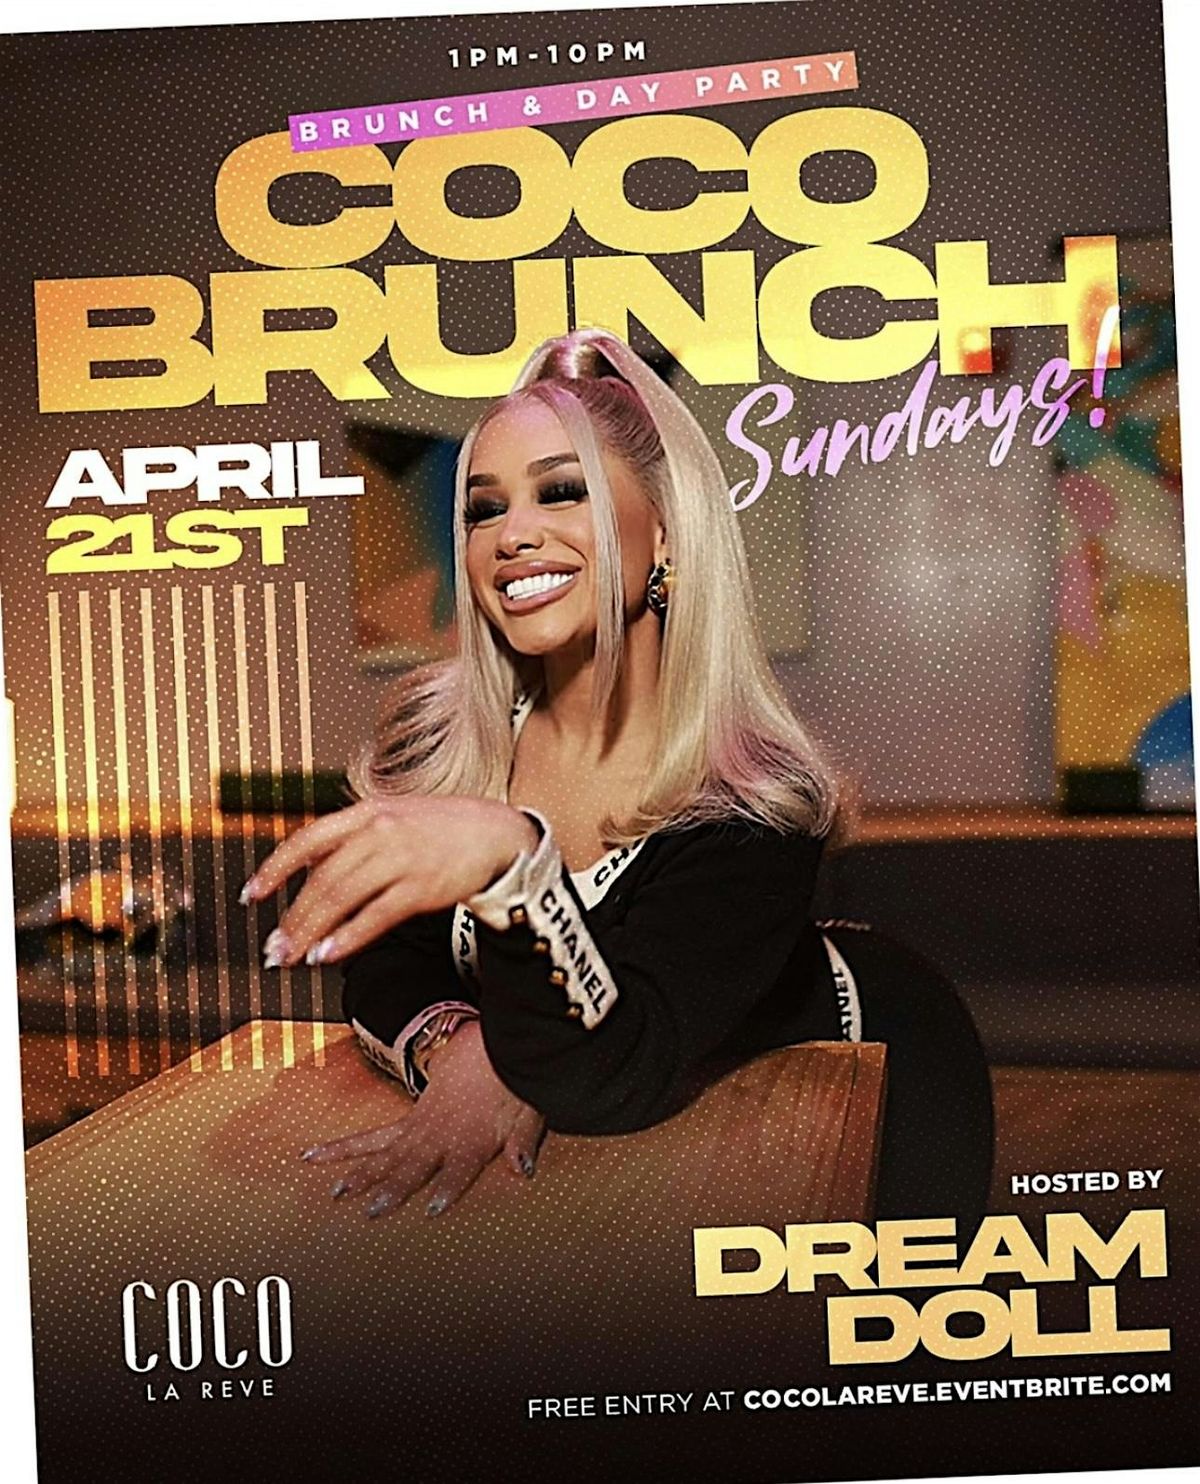 COCO SUNDAY BRUNCH HOSTED BY DREAM DOLL